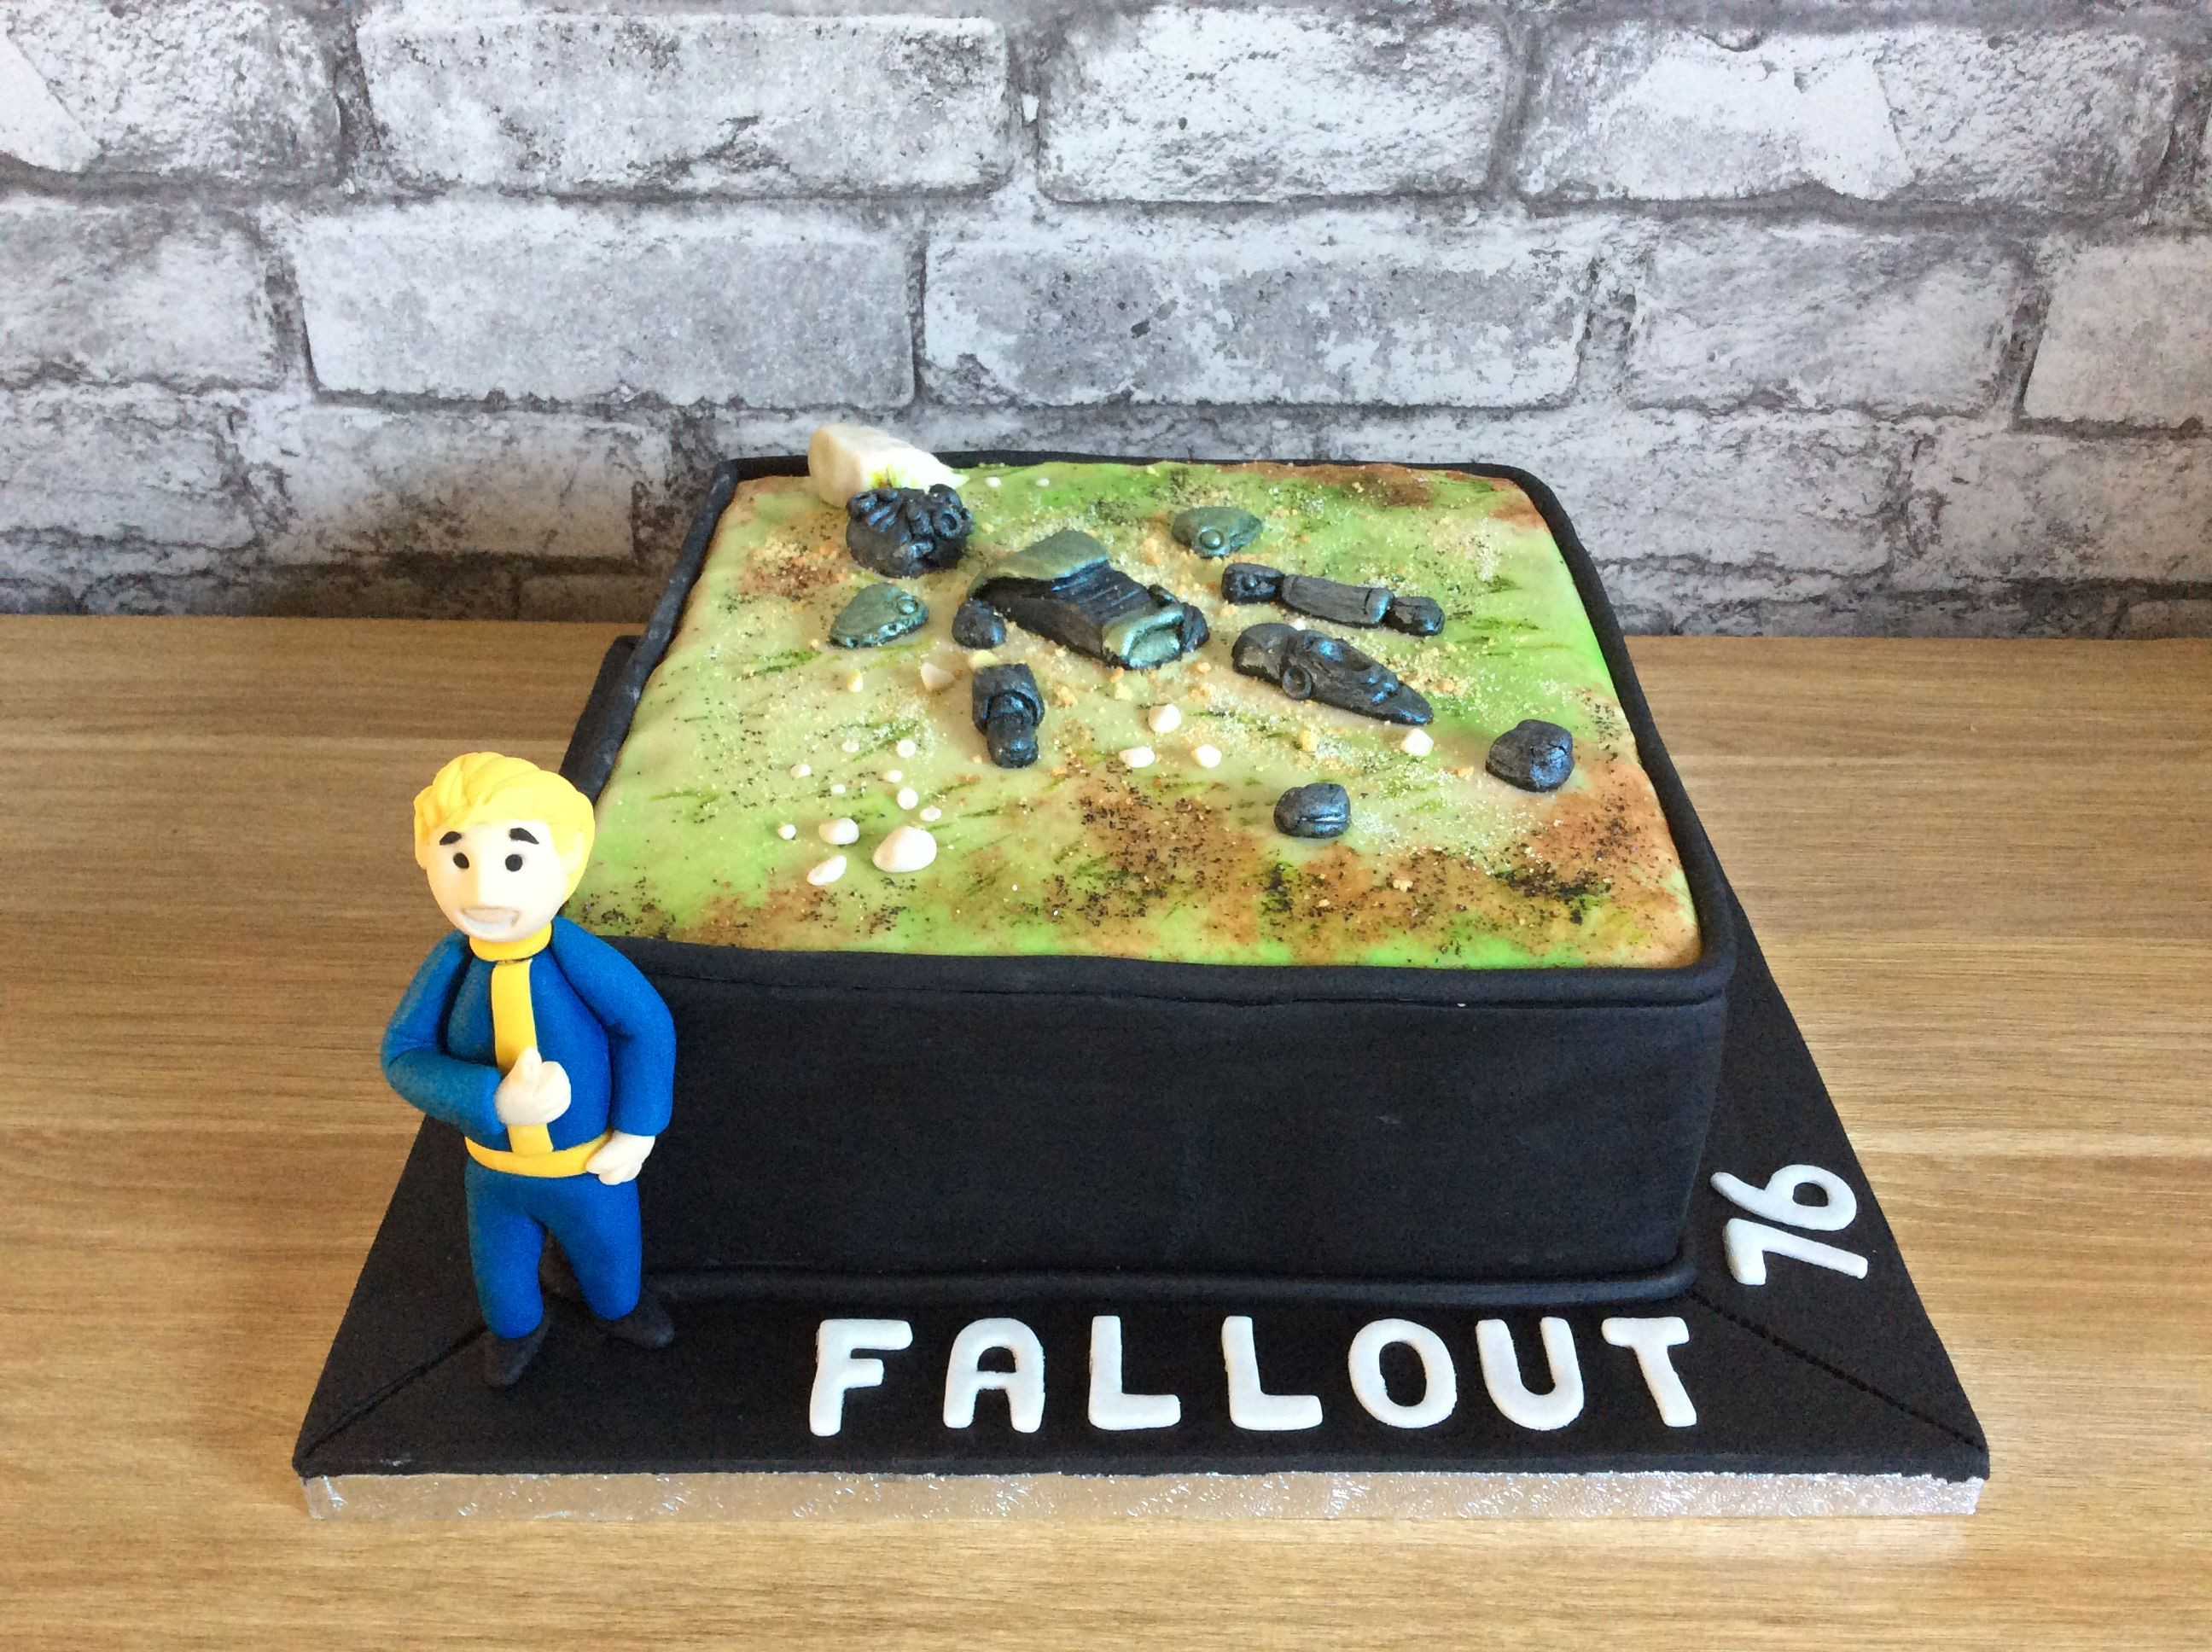 Fallout Birthday Cake
 Fallout 76 themed birthday cake x Quick Saves